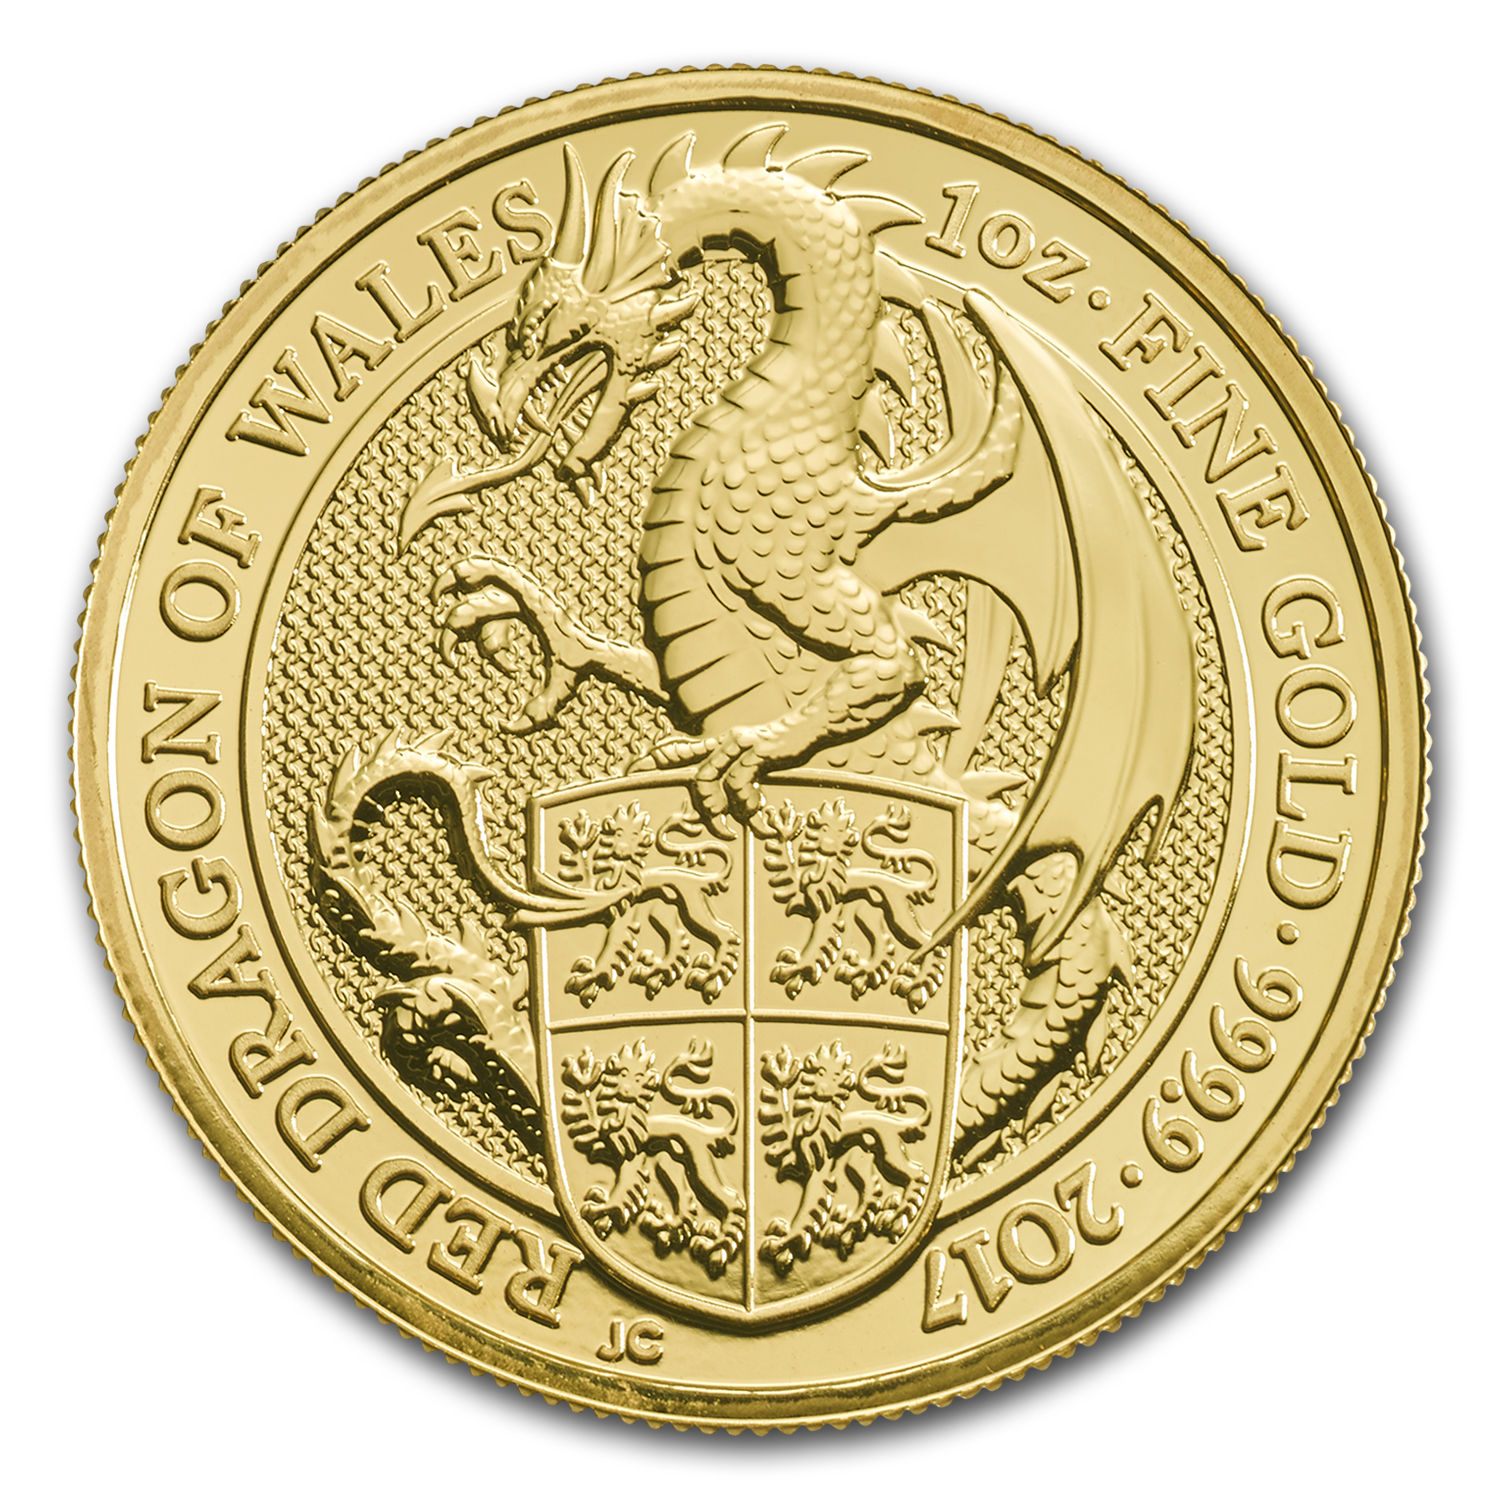 2017 Great Britain 1 oz Gold Queen's Beasts The Dragon - SKU #117682